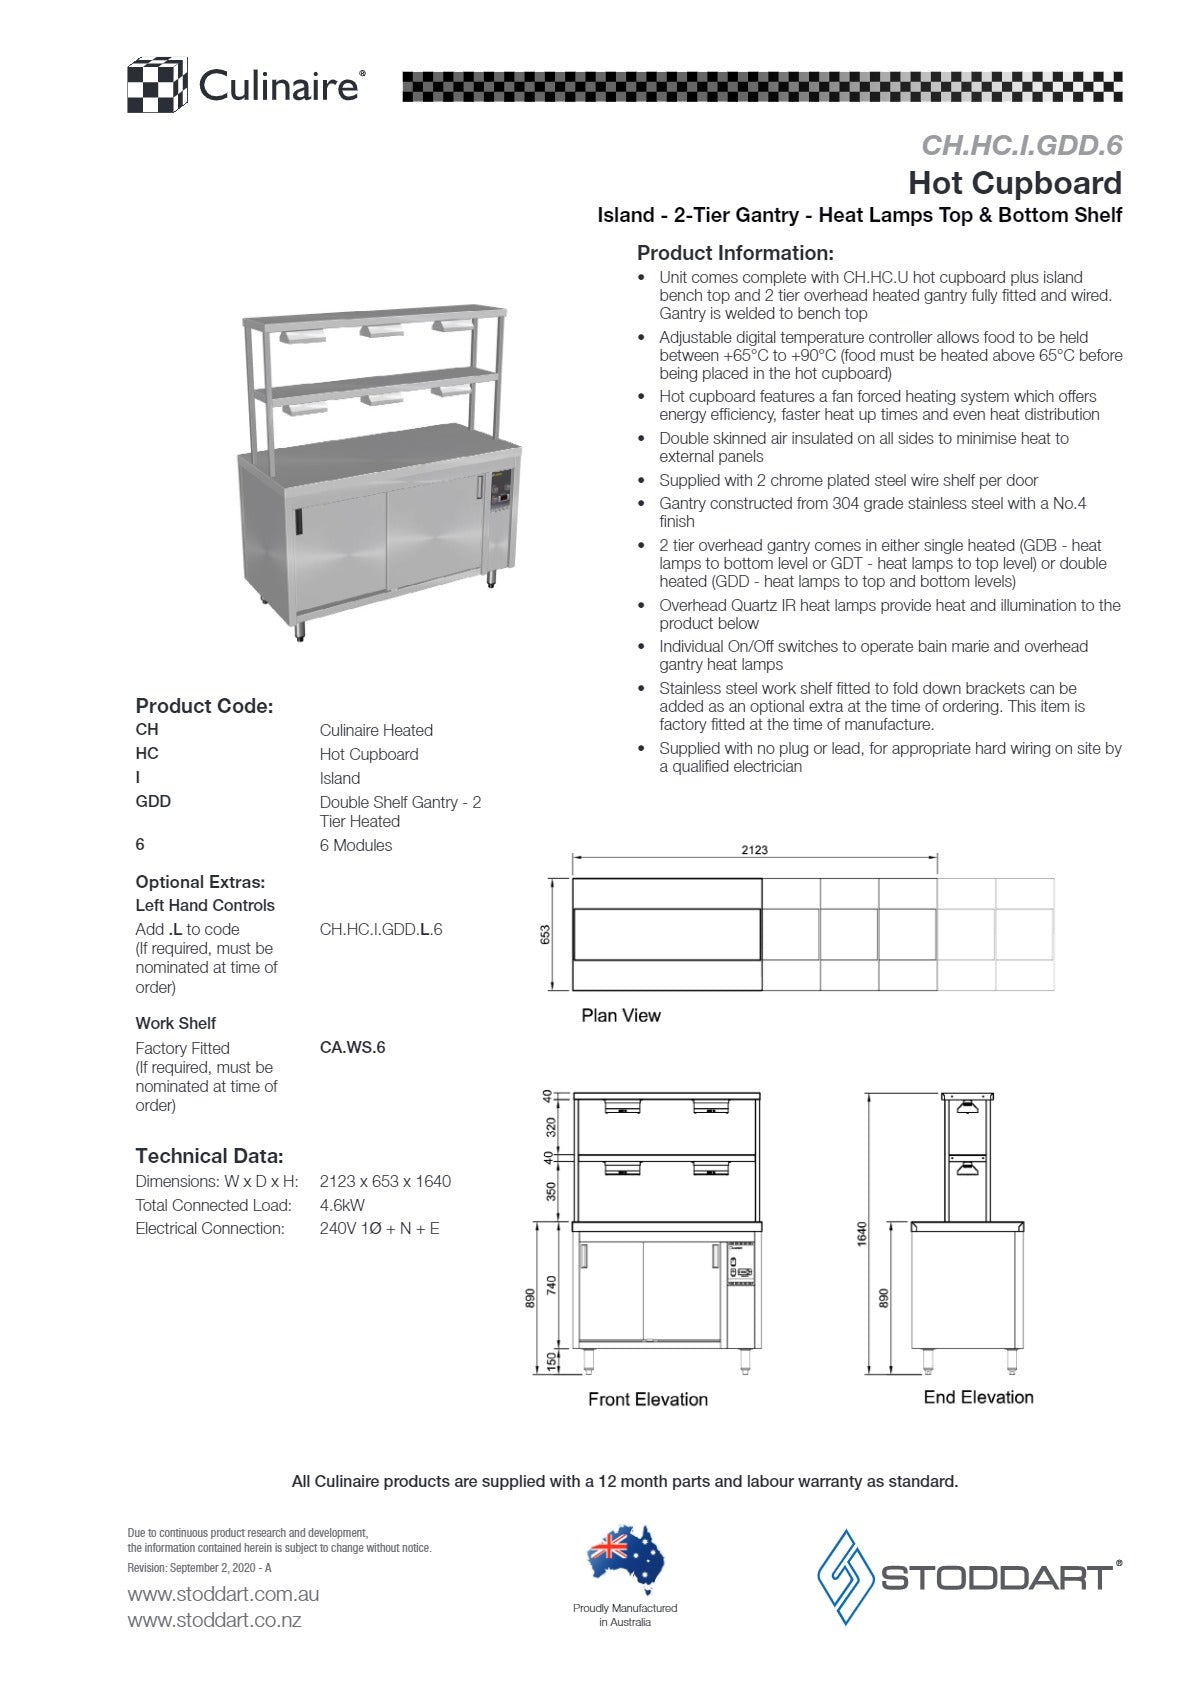 Thumbnail - Culinaire CH.HC.I.GDD.6 - Hot Cupboard Island With Double Gantry & Heat Lamps